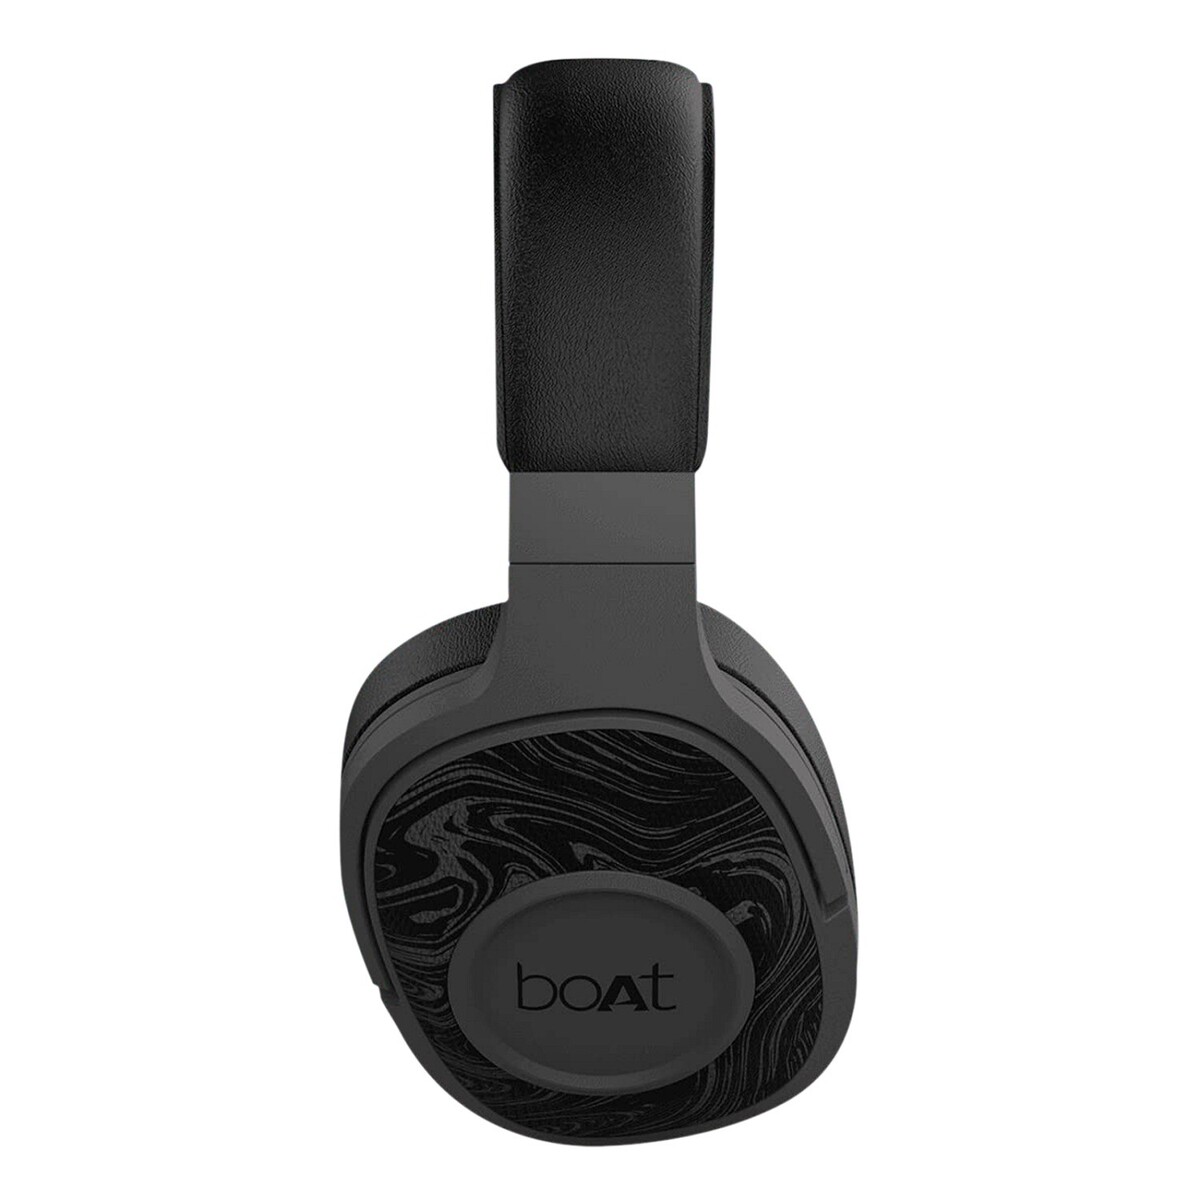 Boat Rockerz 558 Bluetooth Headset with Mic Dual Connectivity, Over Ear, Black